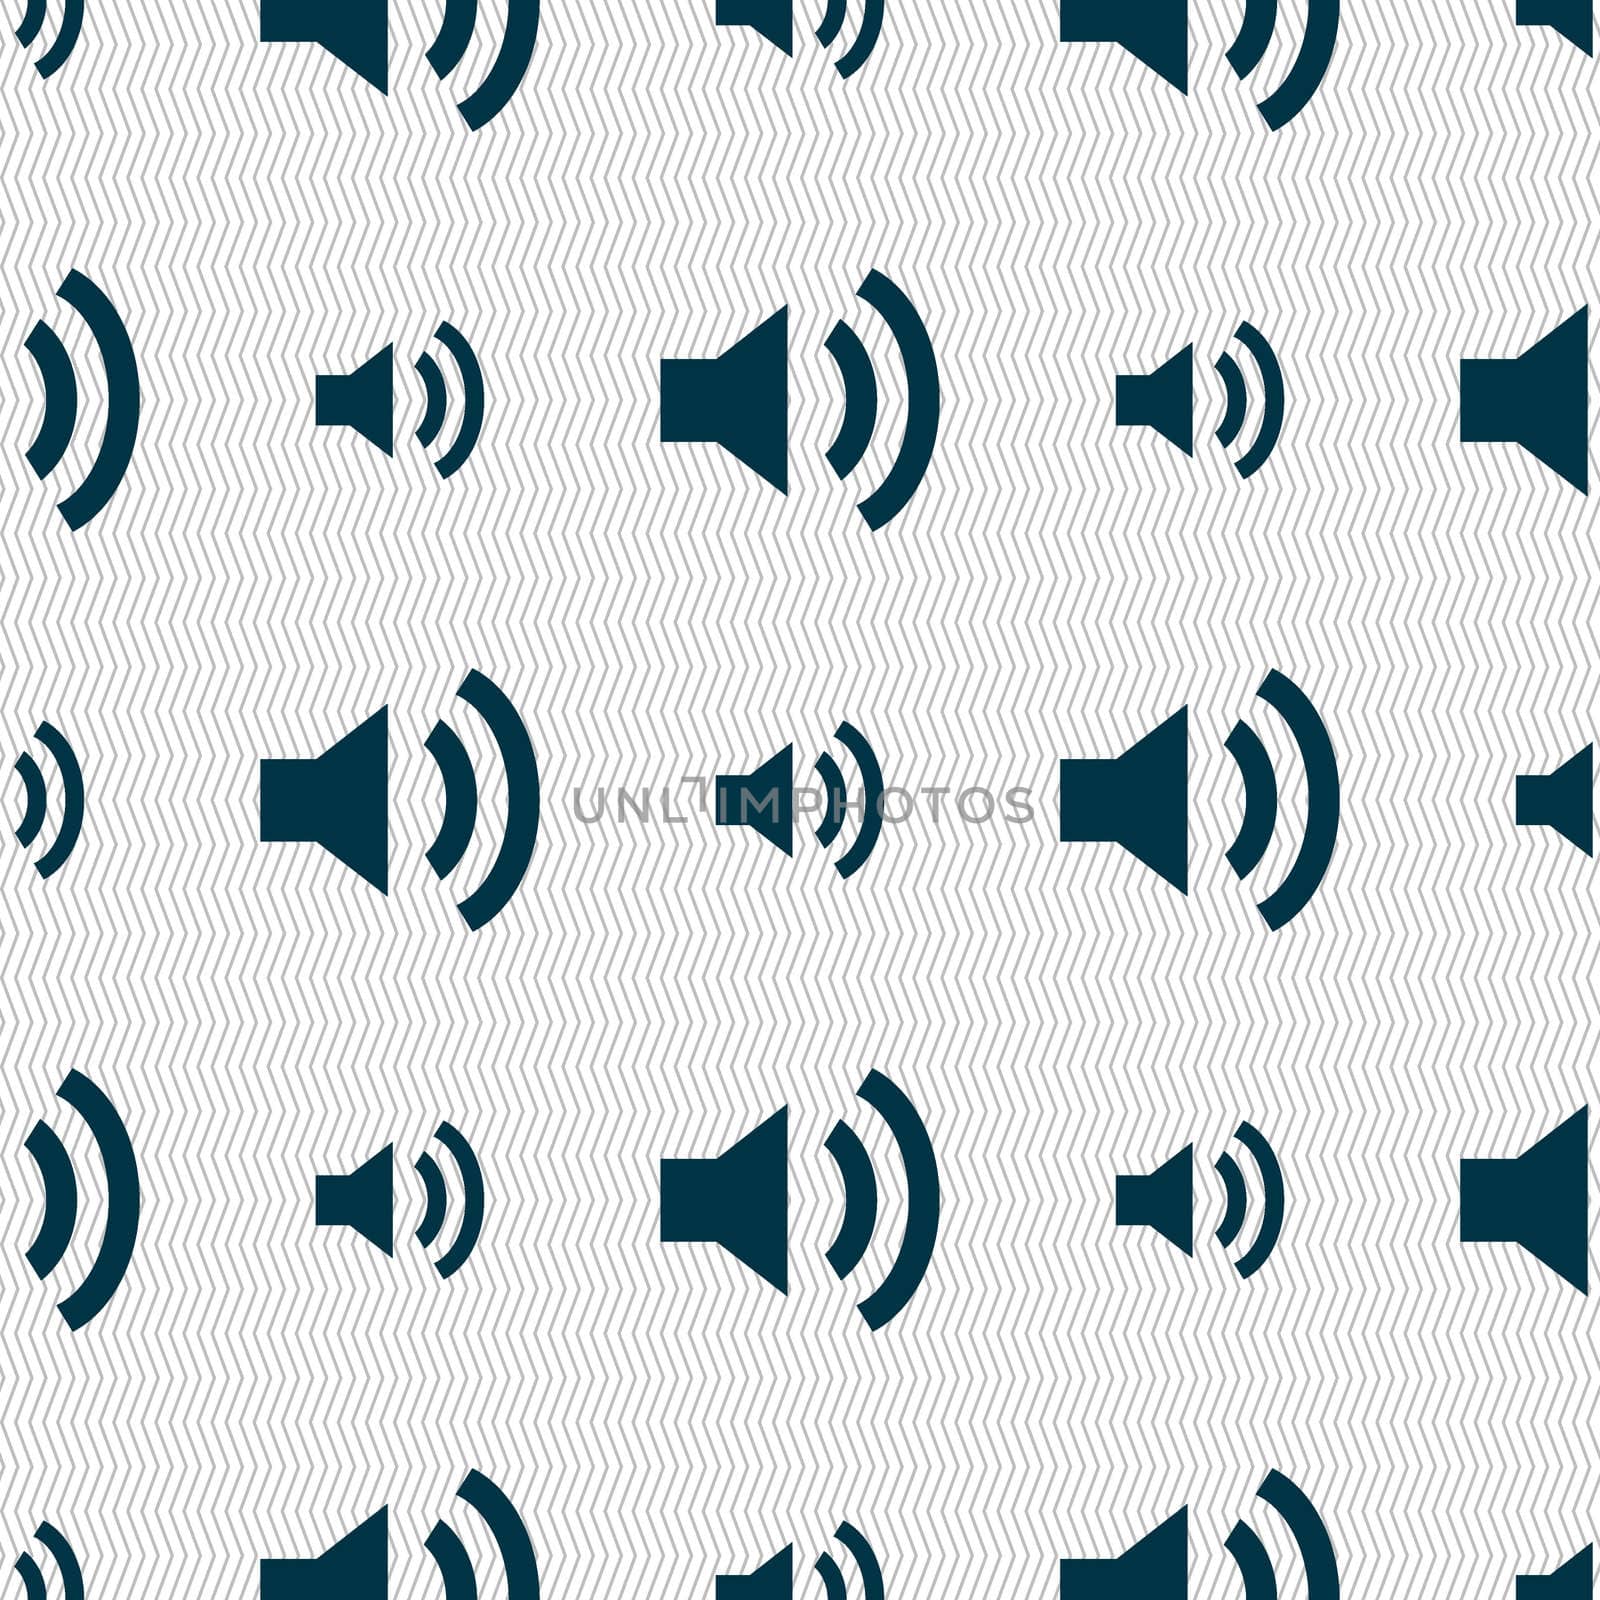 Speaker volume sign icon. Sound symbol. Seamless abstract background with geometric shapes.  by serhii_lohvyniuk